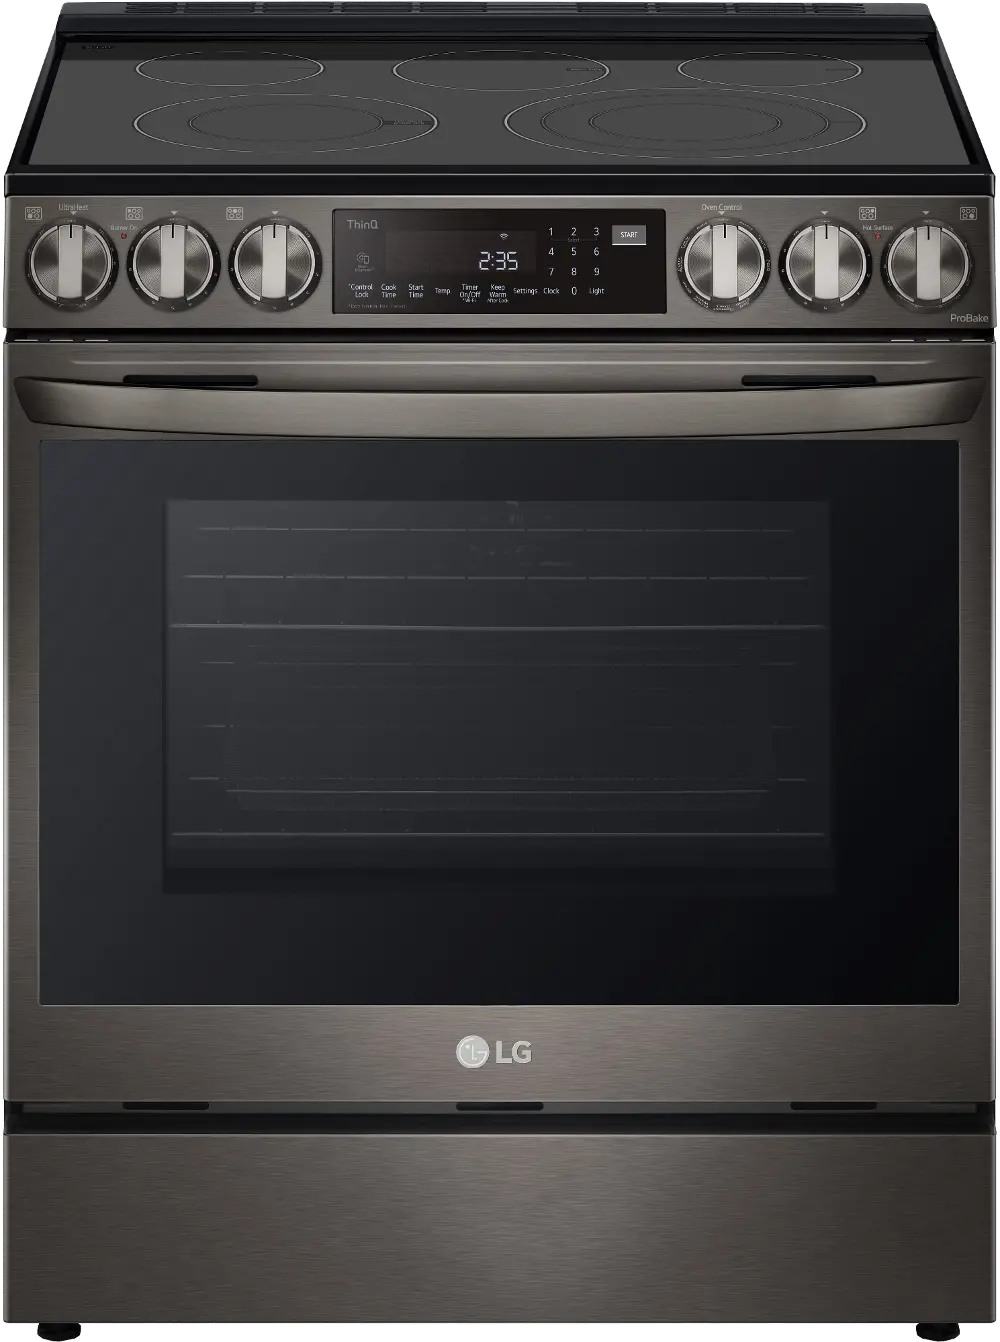 LSEL6335D LG 6.3 cu ft Electric Range with InstaView - Black Stainless Steel-1